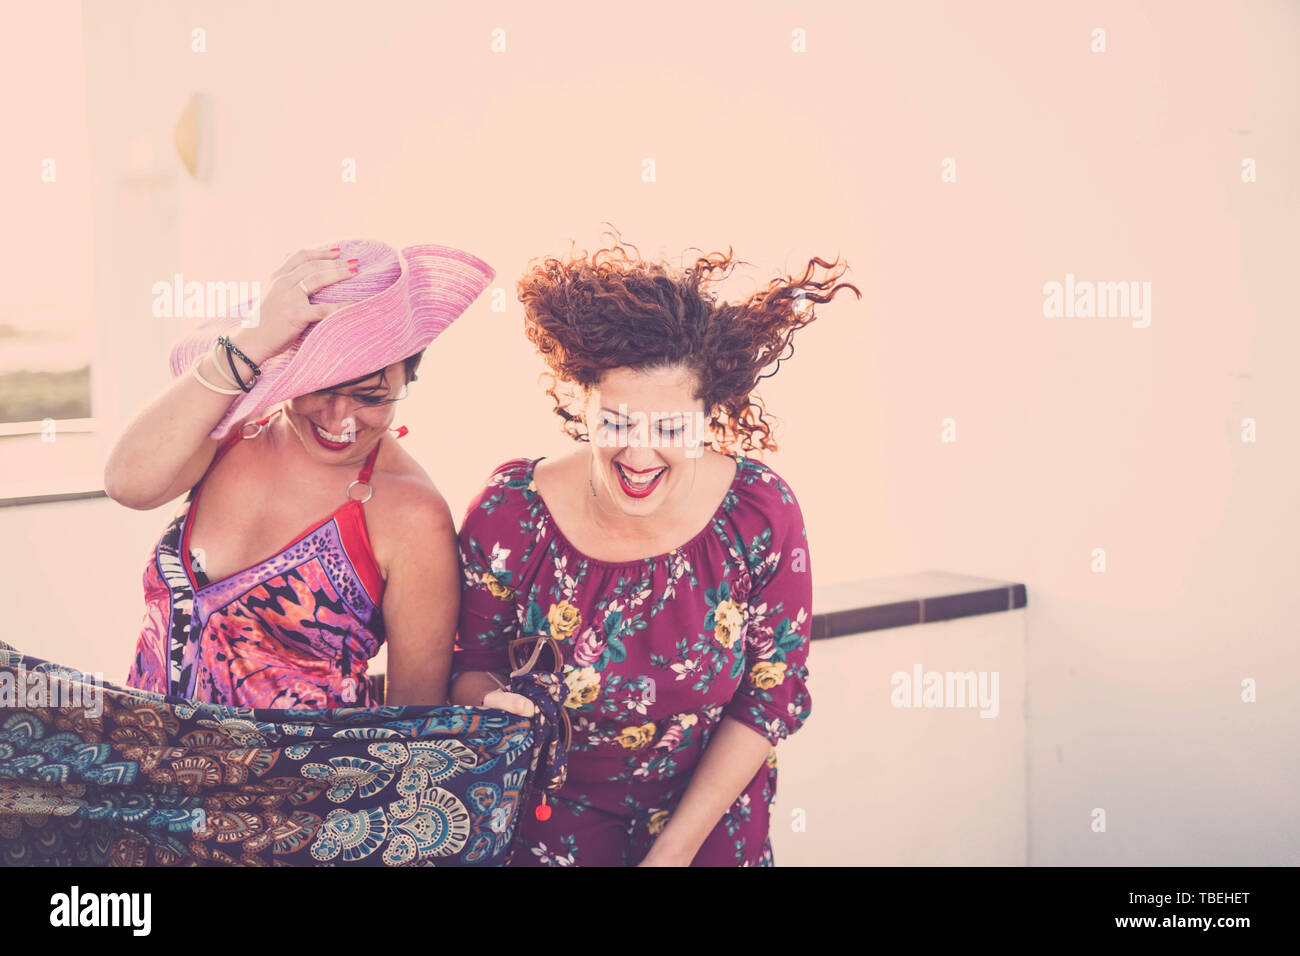 Crazy and cheerful couple of young caucasian women friends laugh a lot - people having fun outdoor in coloured party festival - bright clear backgroun Stock Photo